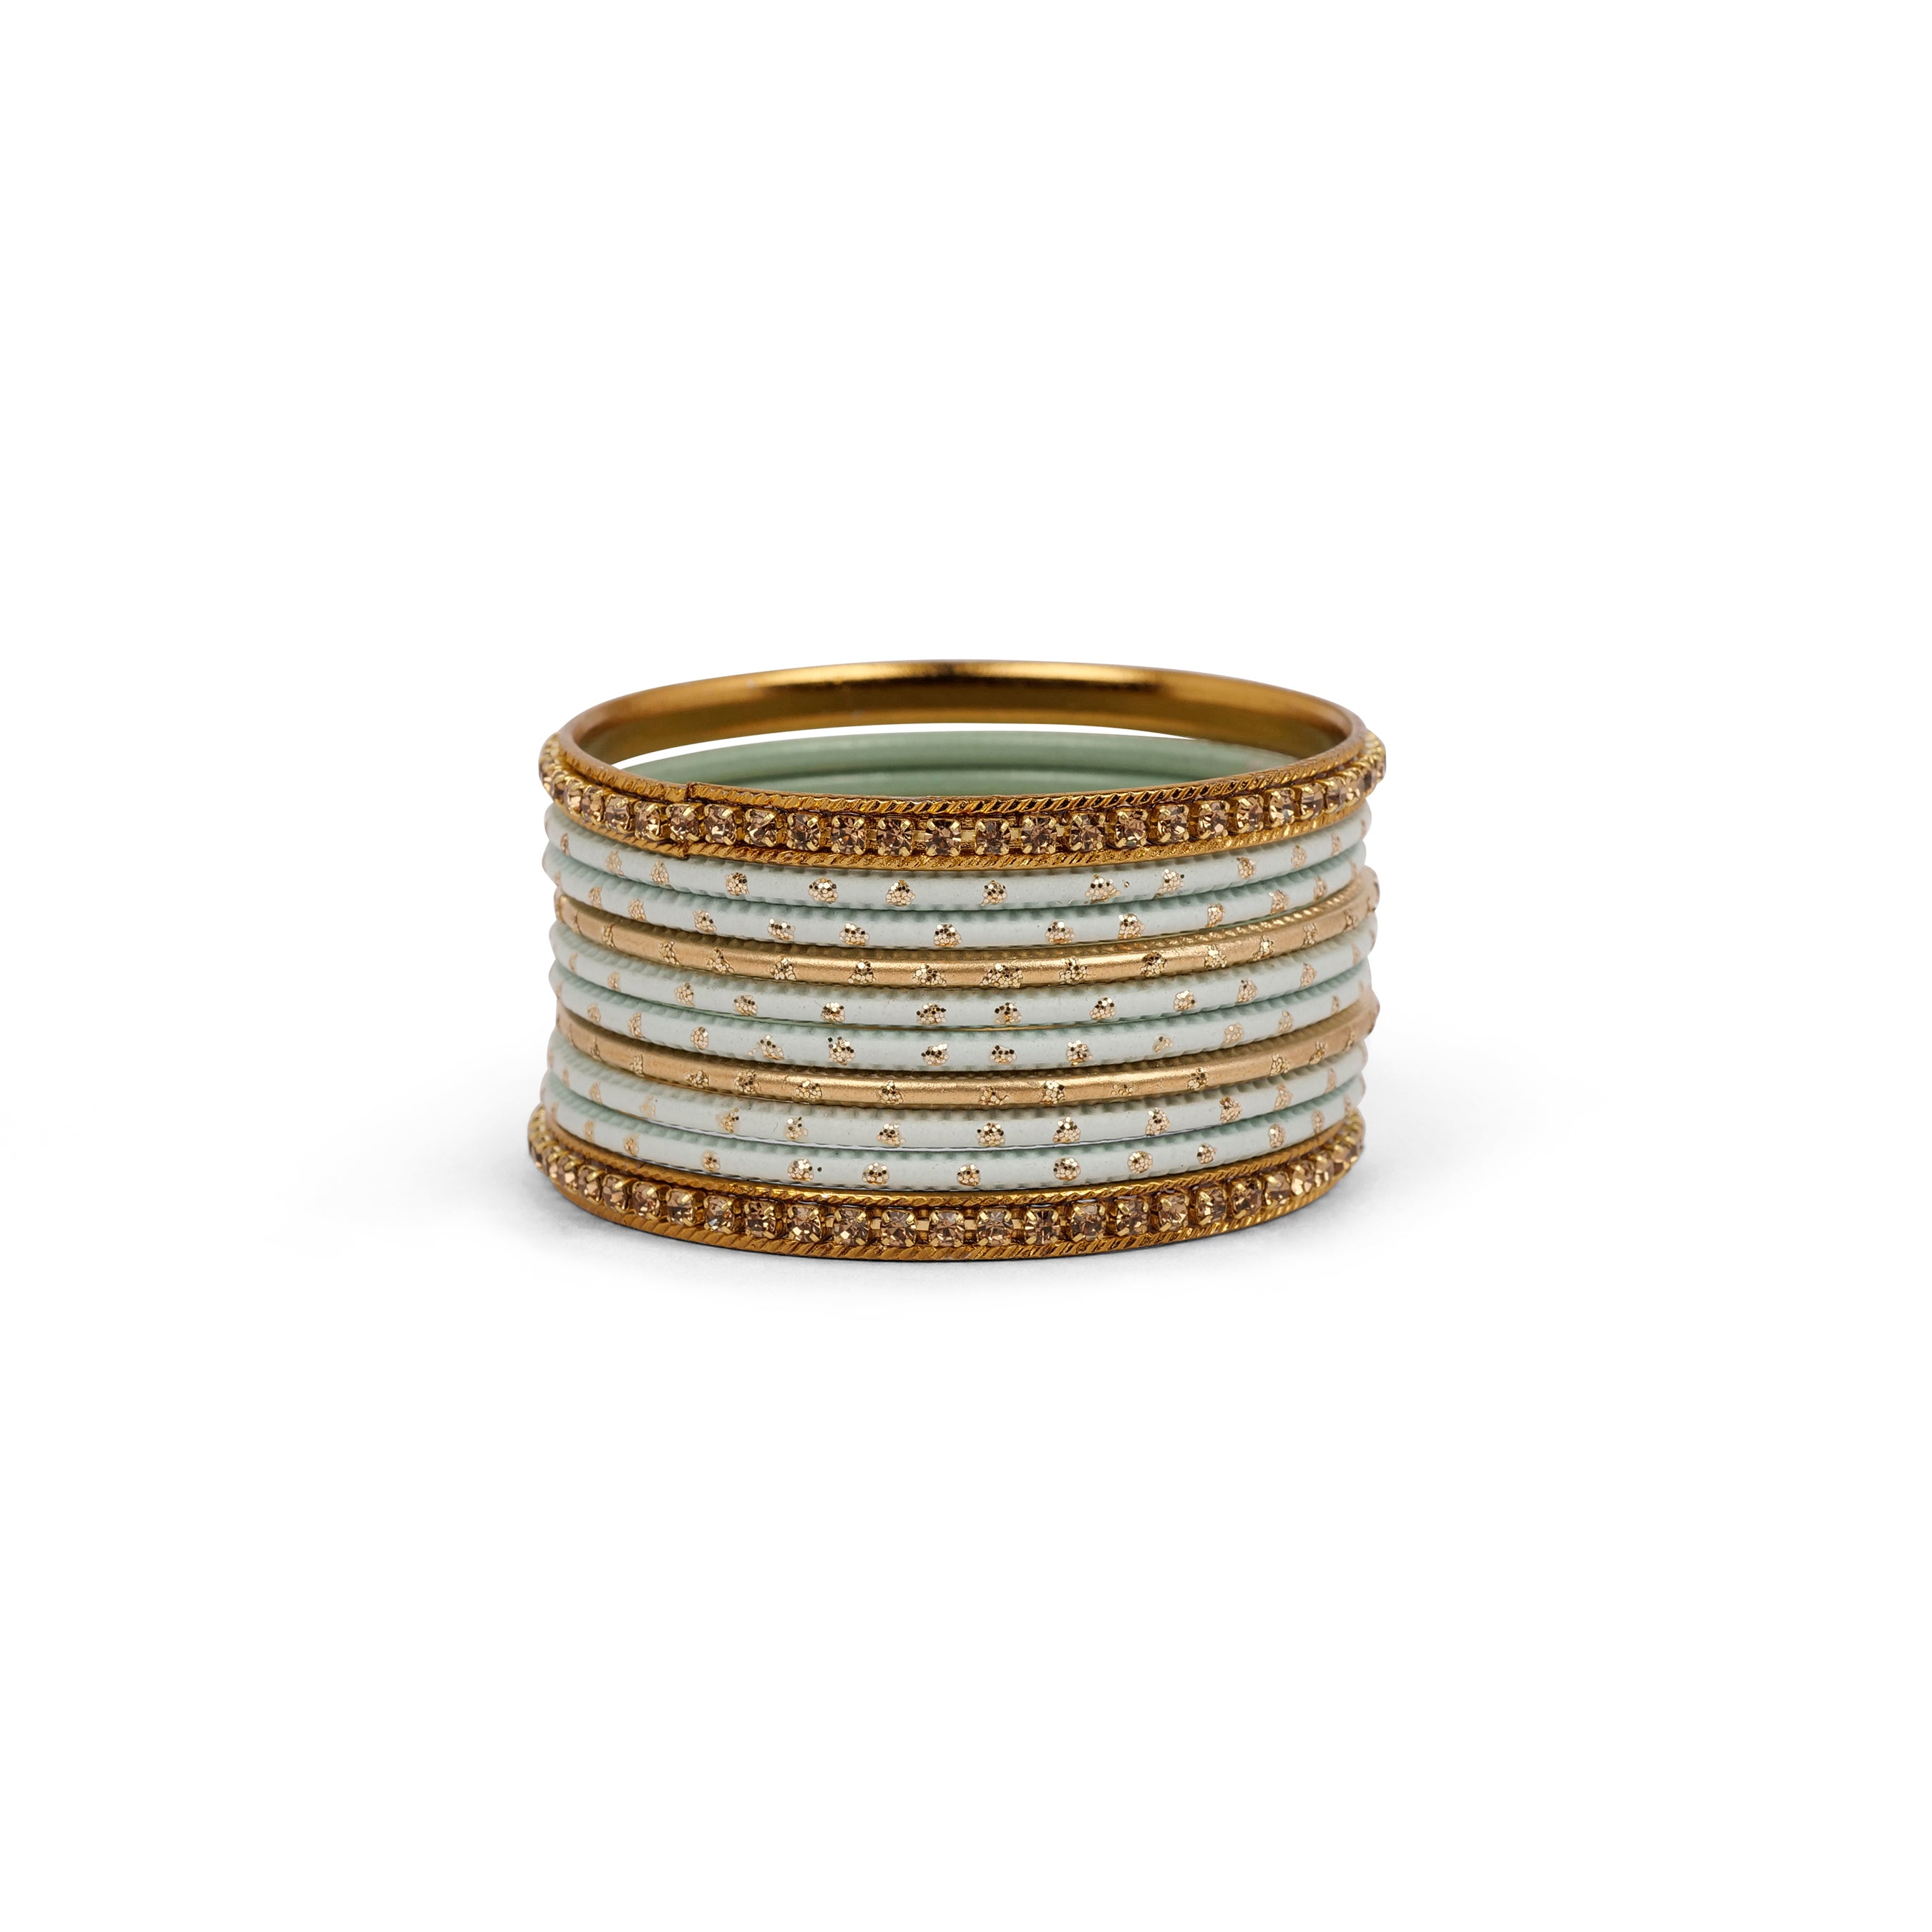 Children's Bangle Set in Mint and Antique Gold